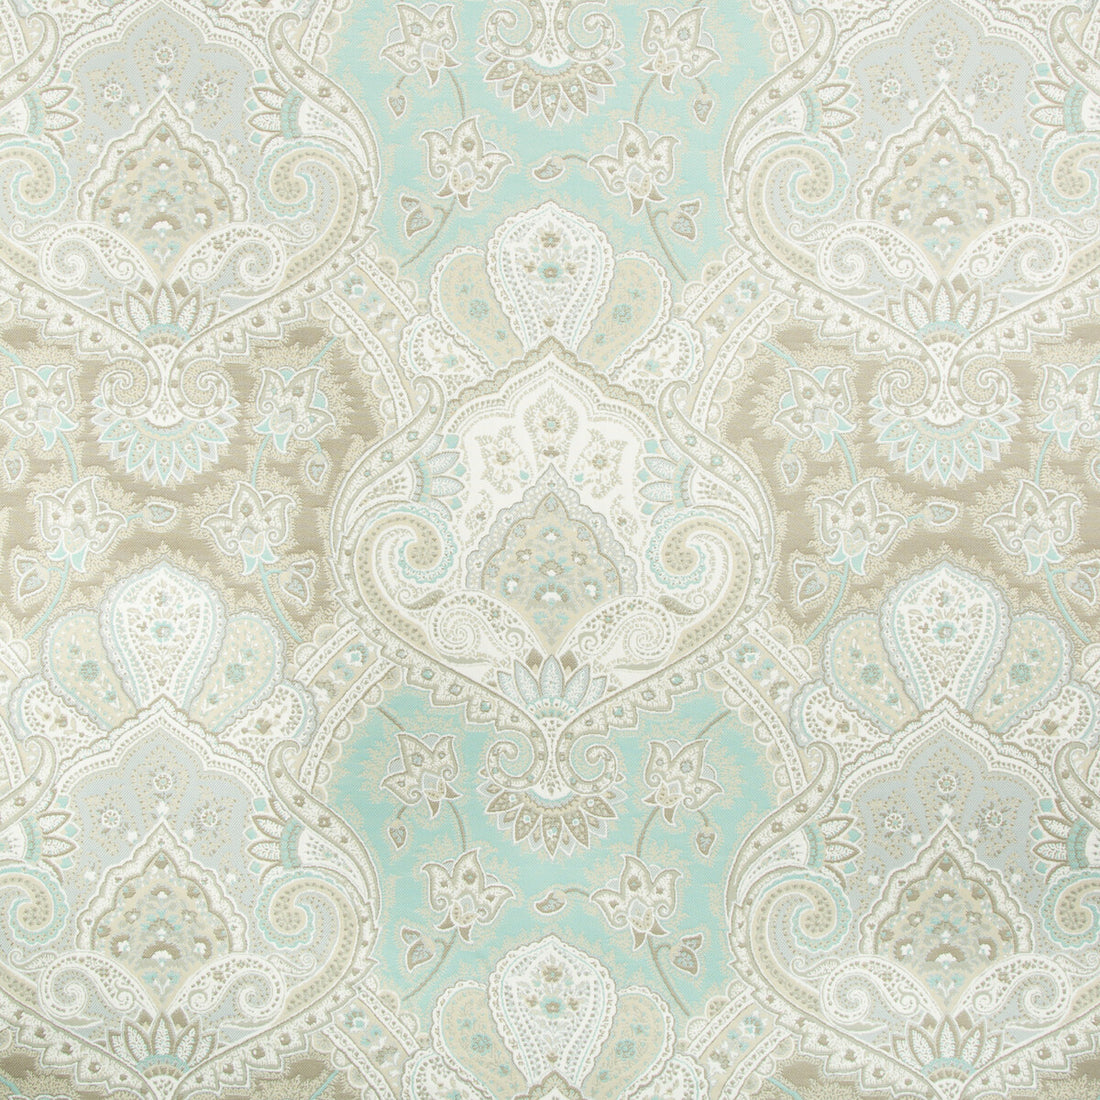 Artemest fabric in surf color - pattern 34558.1613.0 - by Kravet Design in the Echo Indoor Outdoor Ibiza collection